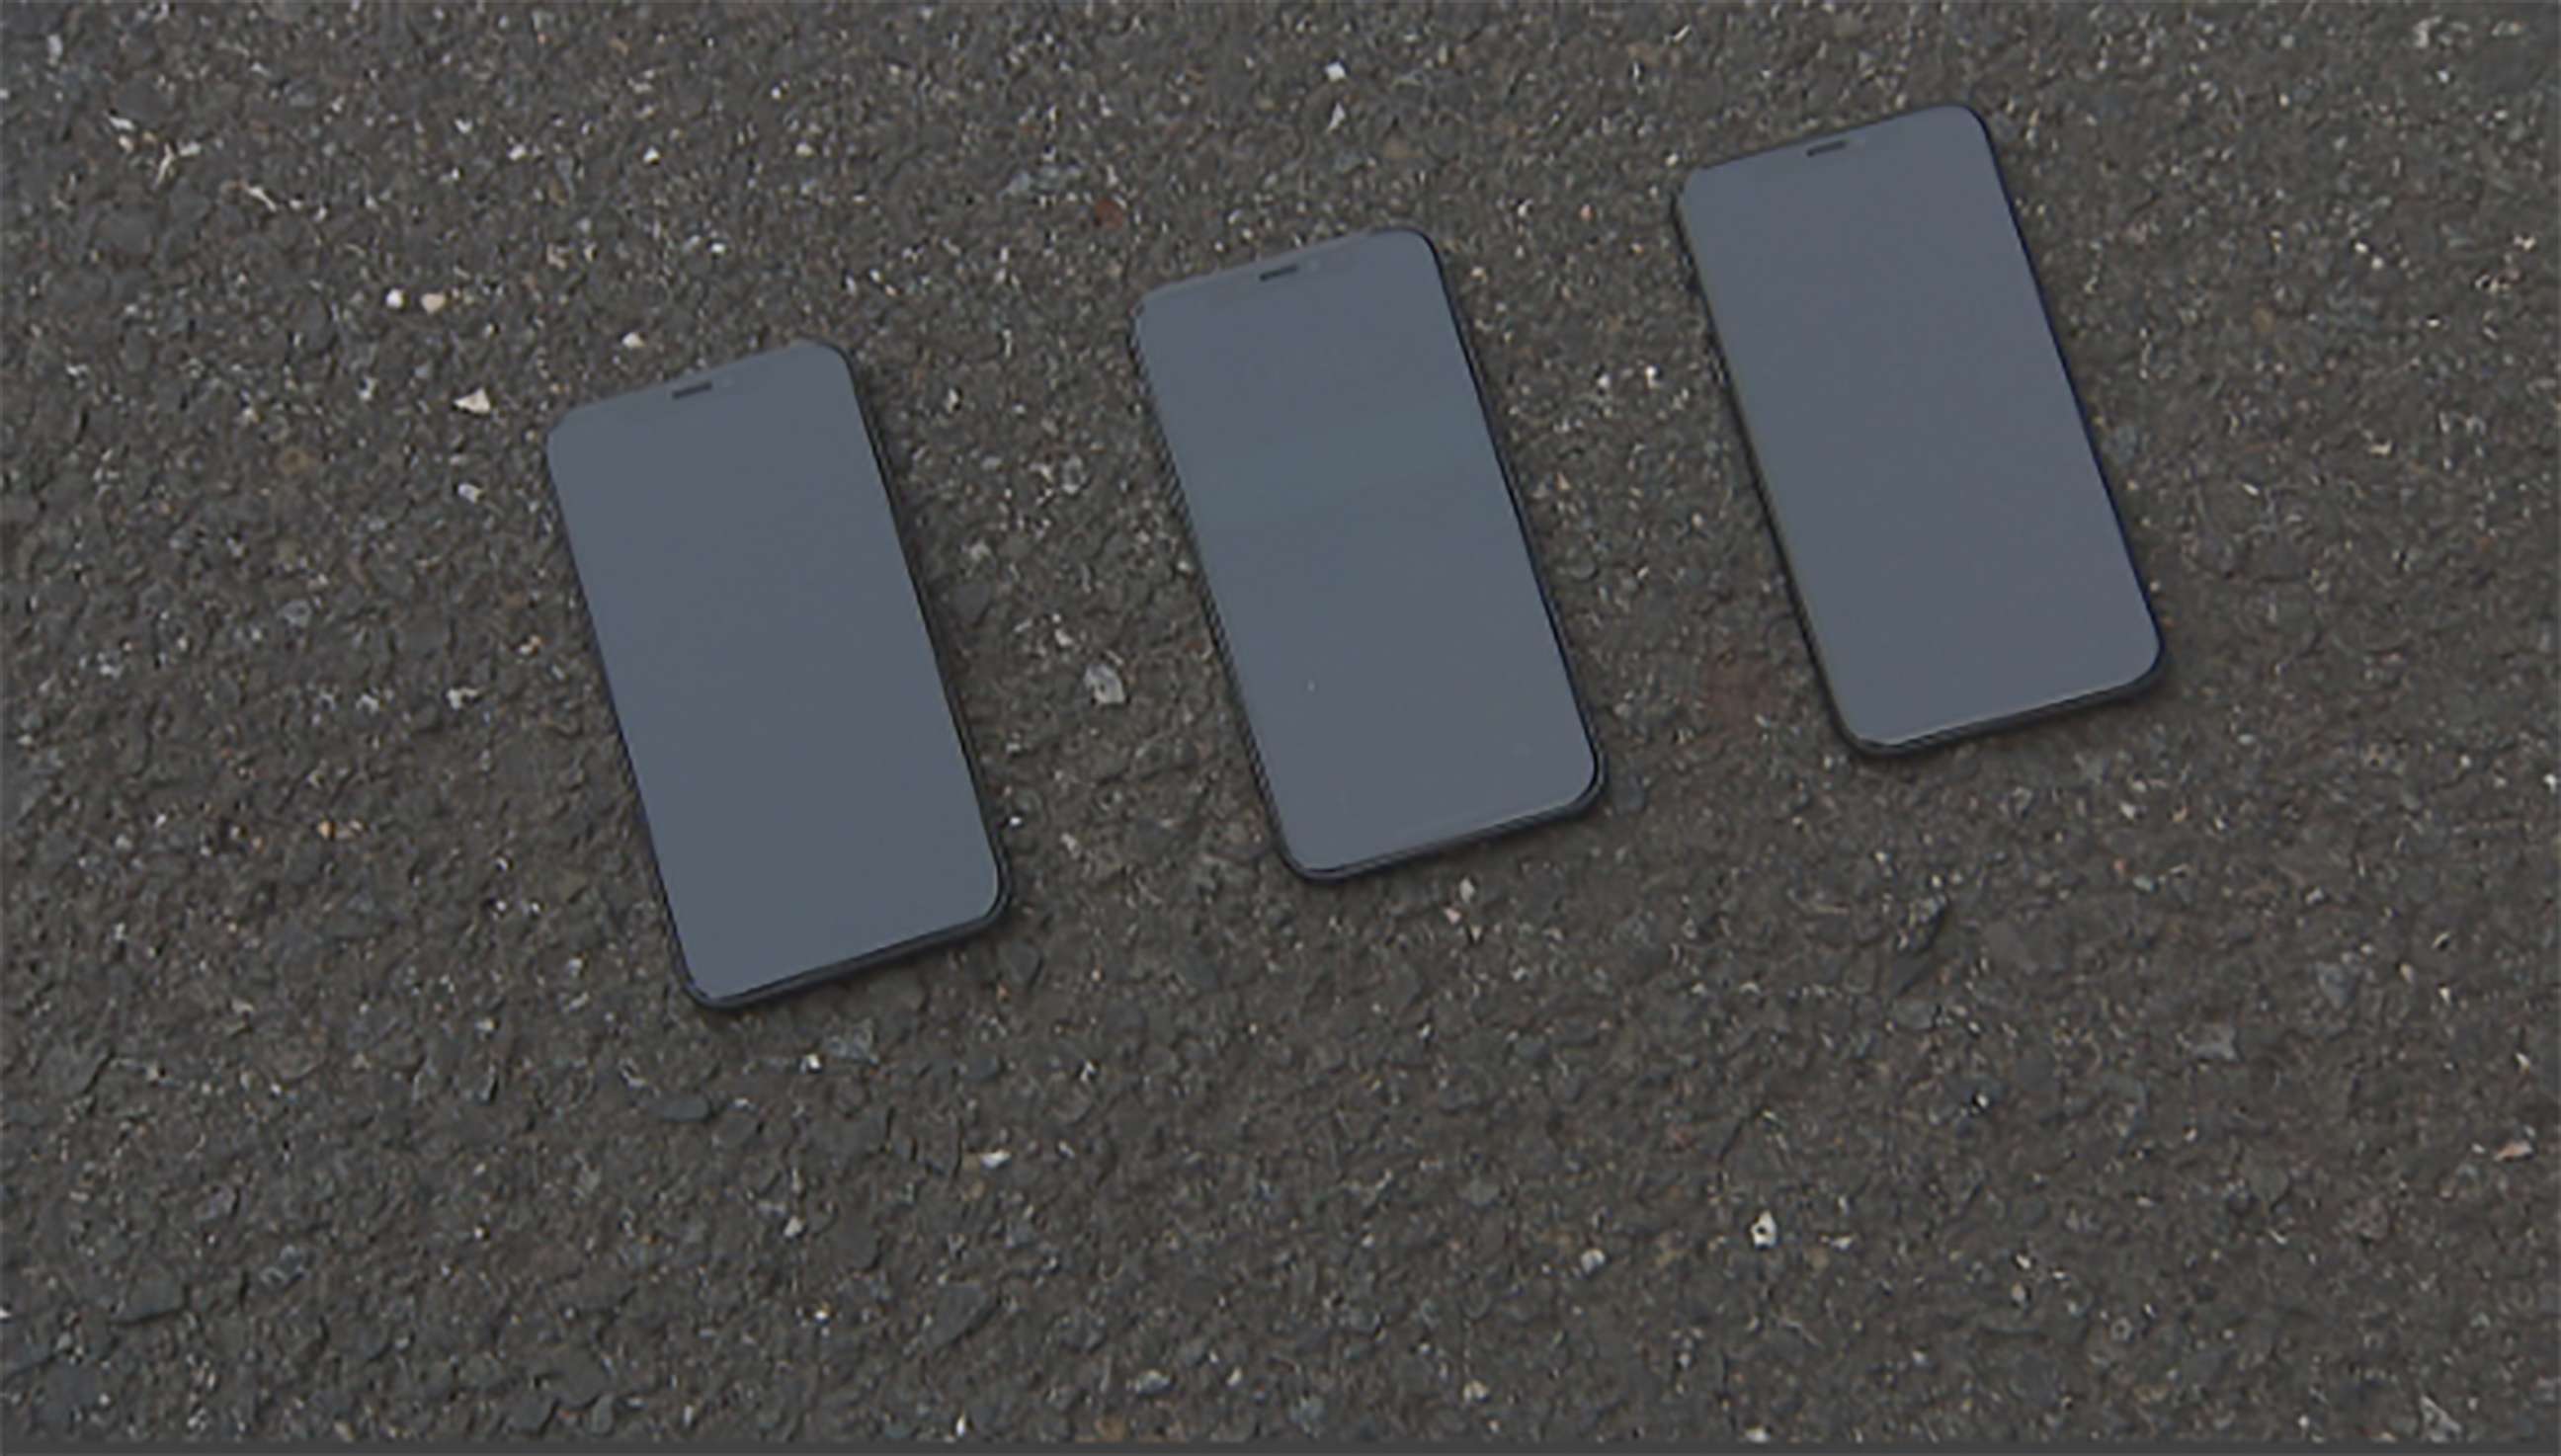 PHOTO: "Good Morning America" dropped three iPhone X phones from three different heights.